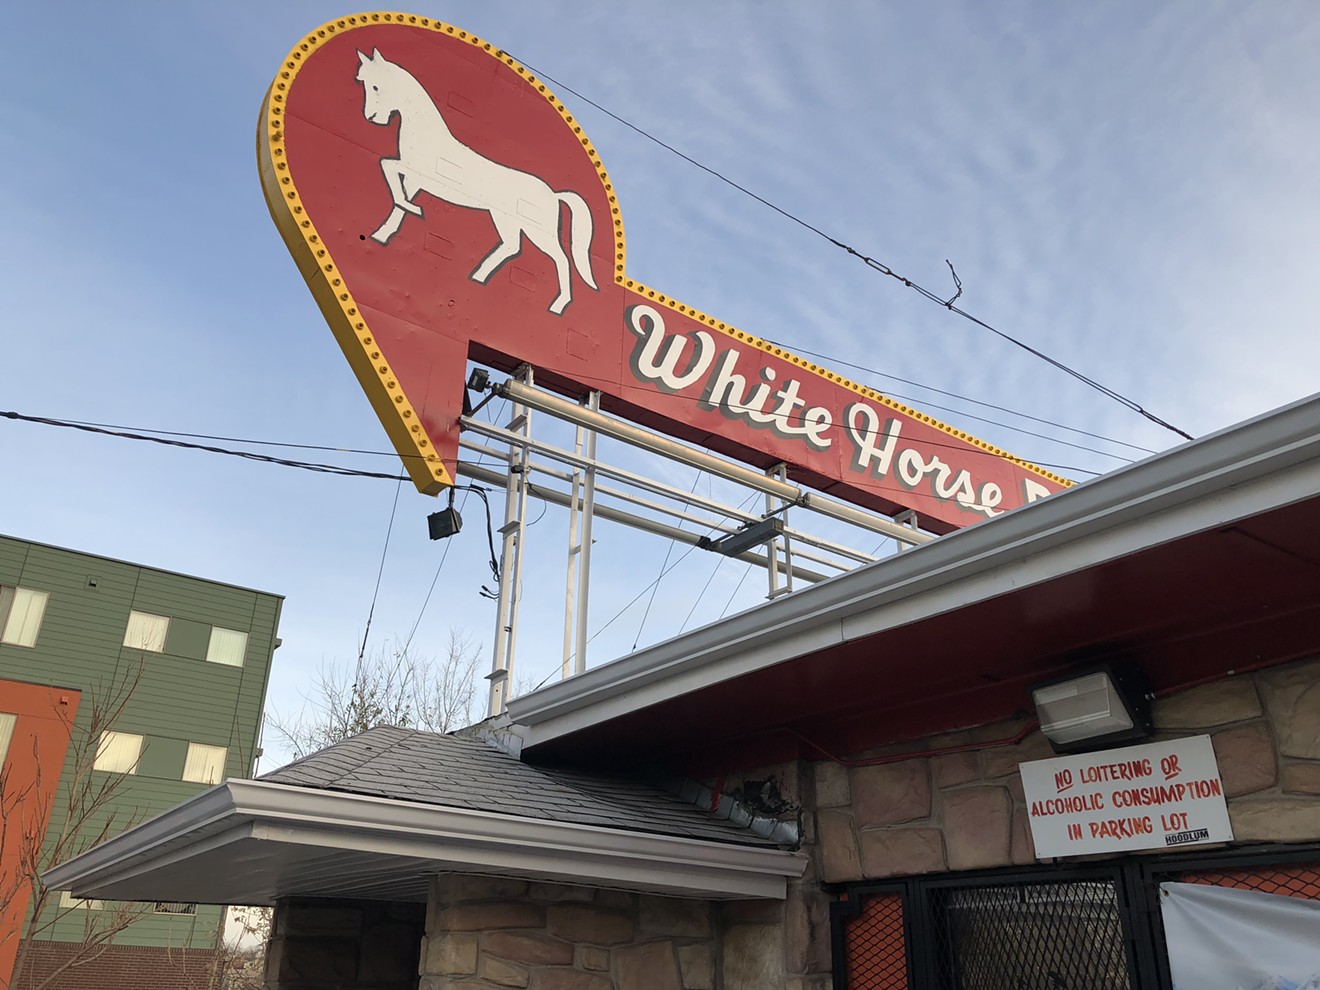 The White Horse Bar has been around since 1926.